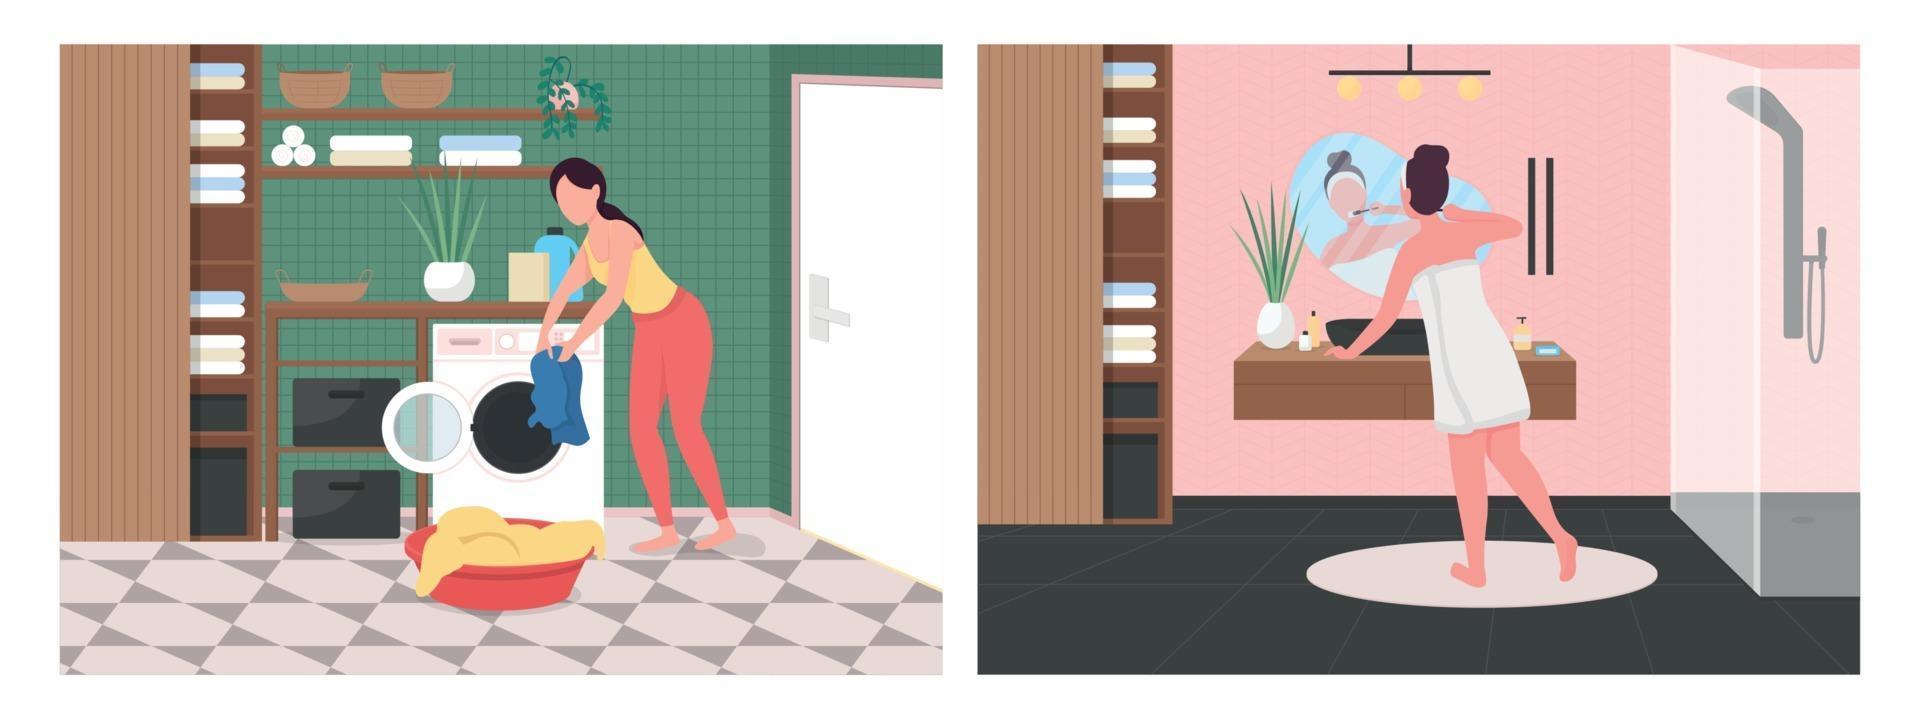 Daily routine in bathroom flat color vector illustration set